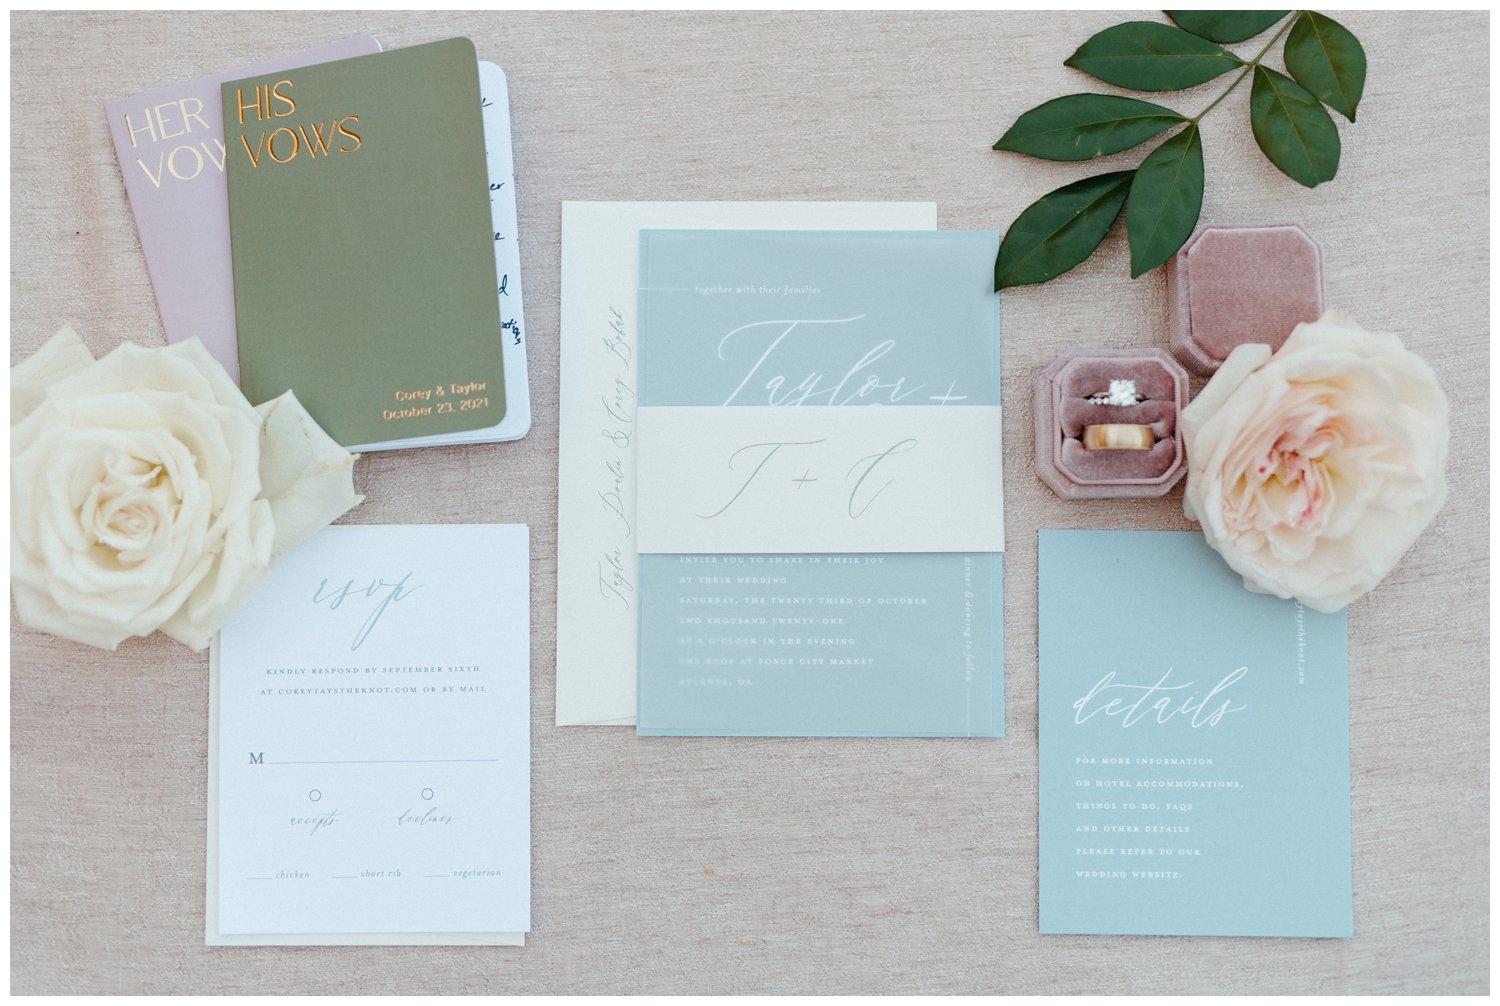 Detail photo of the invitation suite and rings for a Ponce City Market wedding